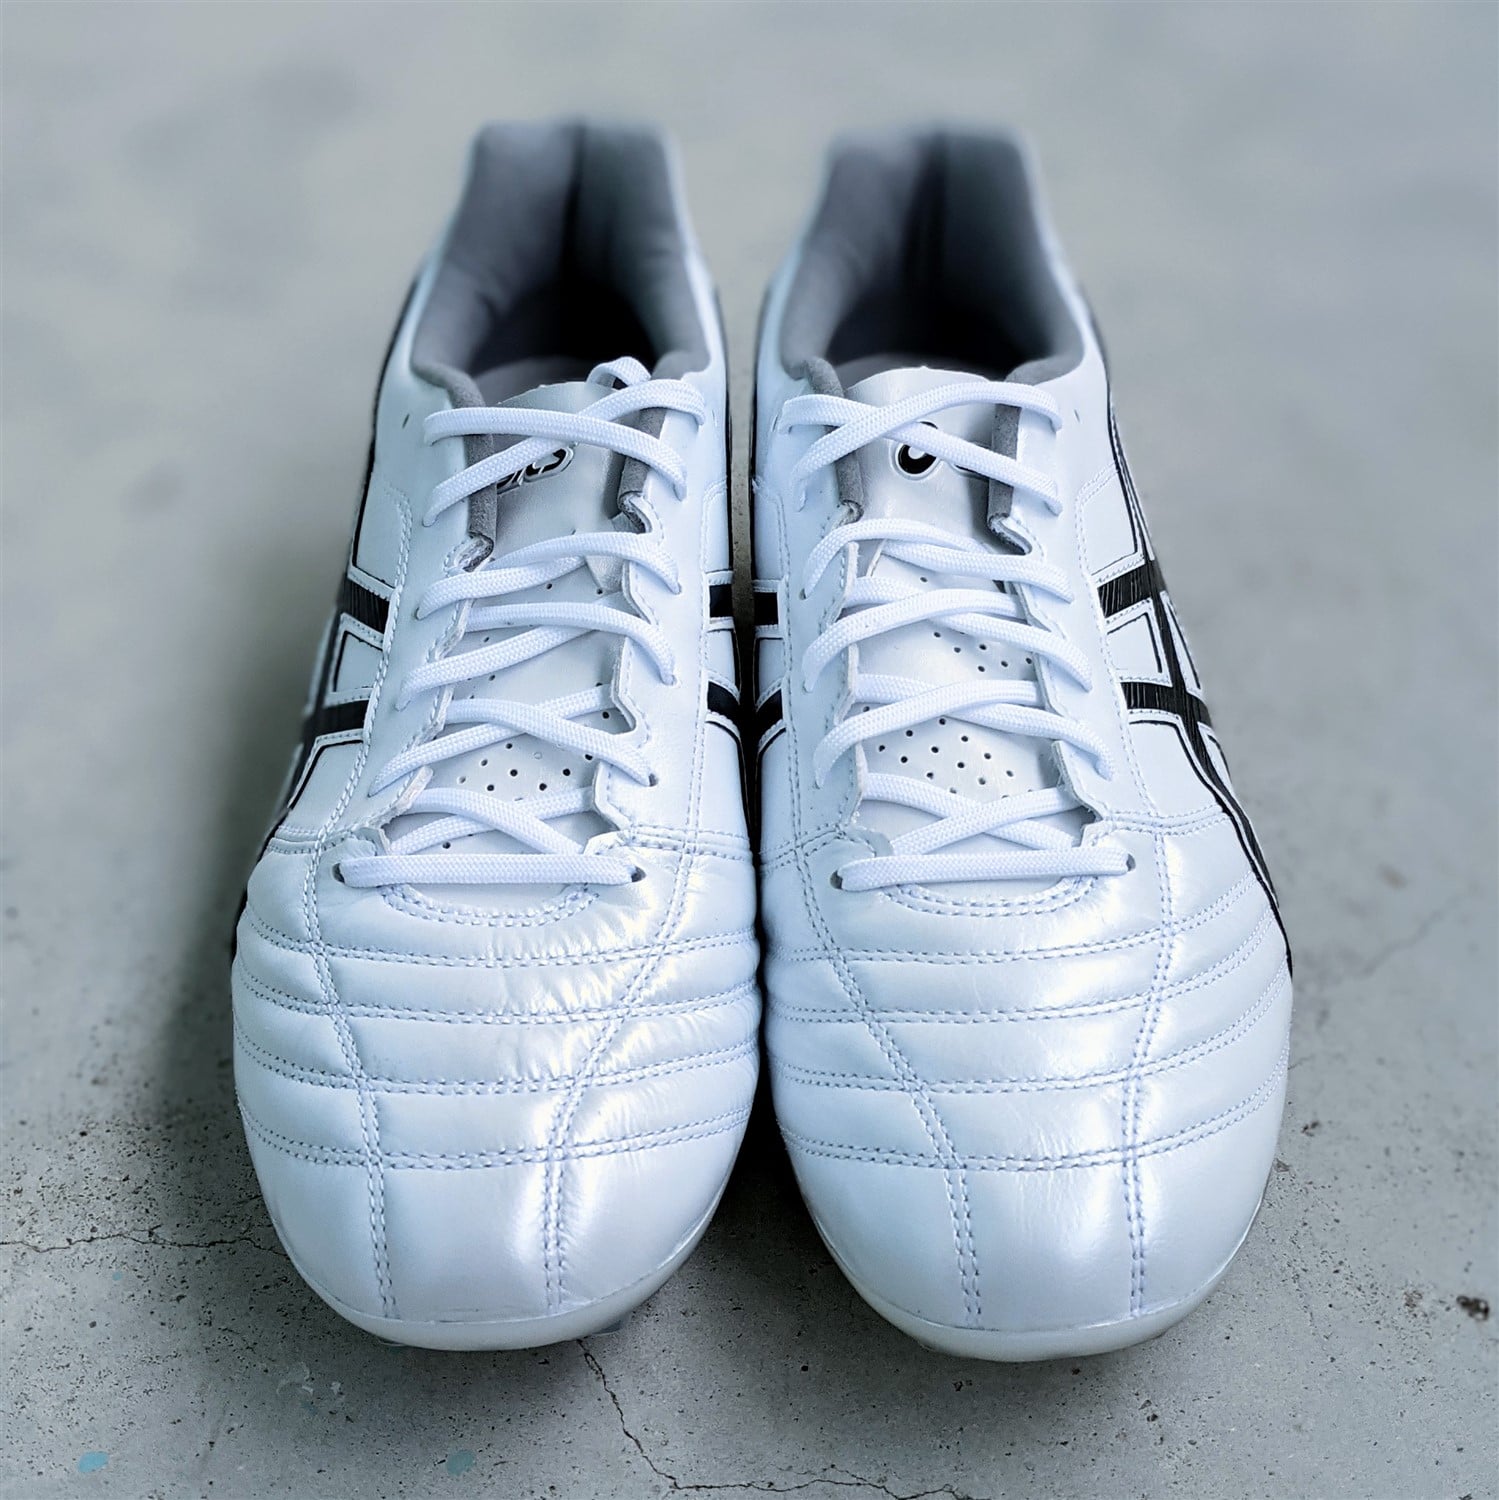 ASICS DS Light AG Review: Perfect for small sided games